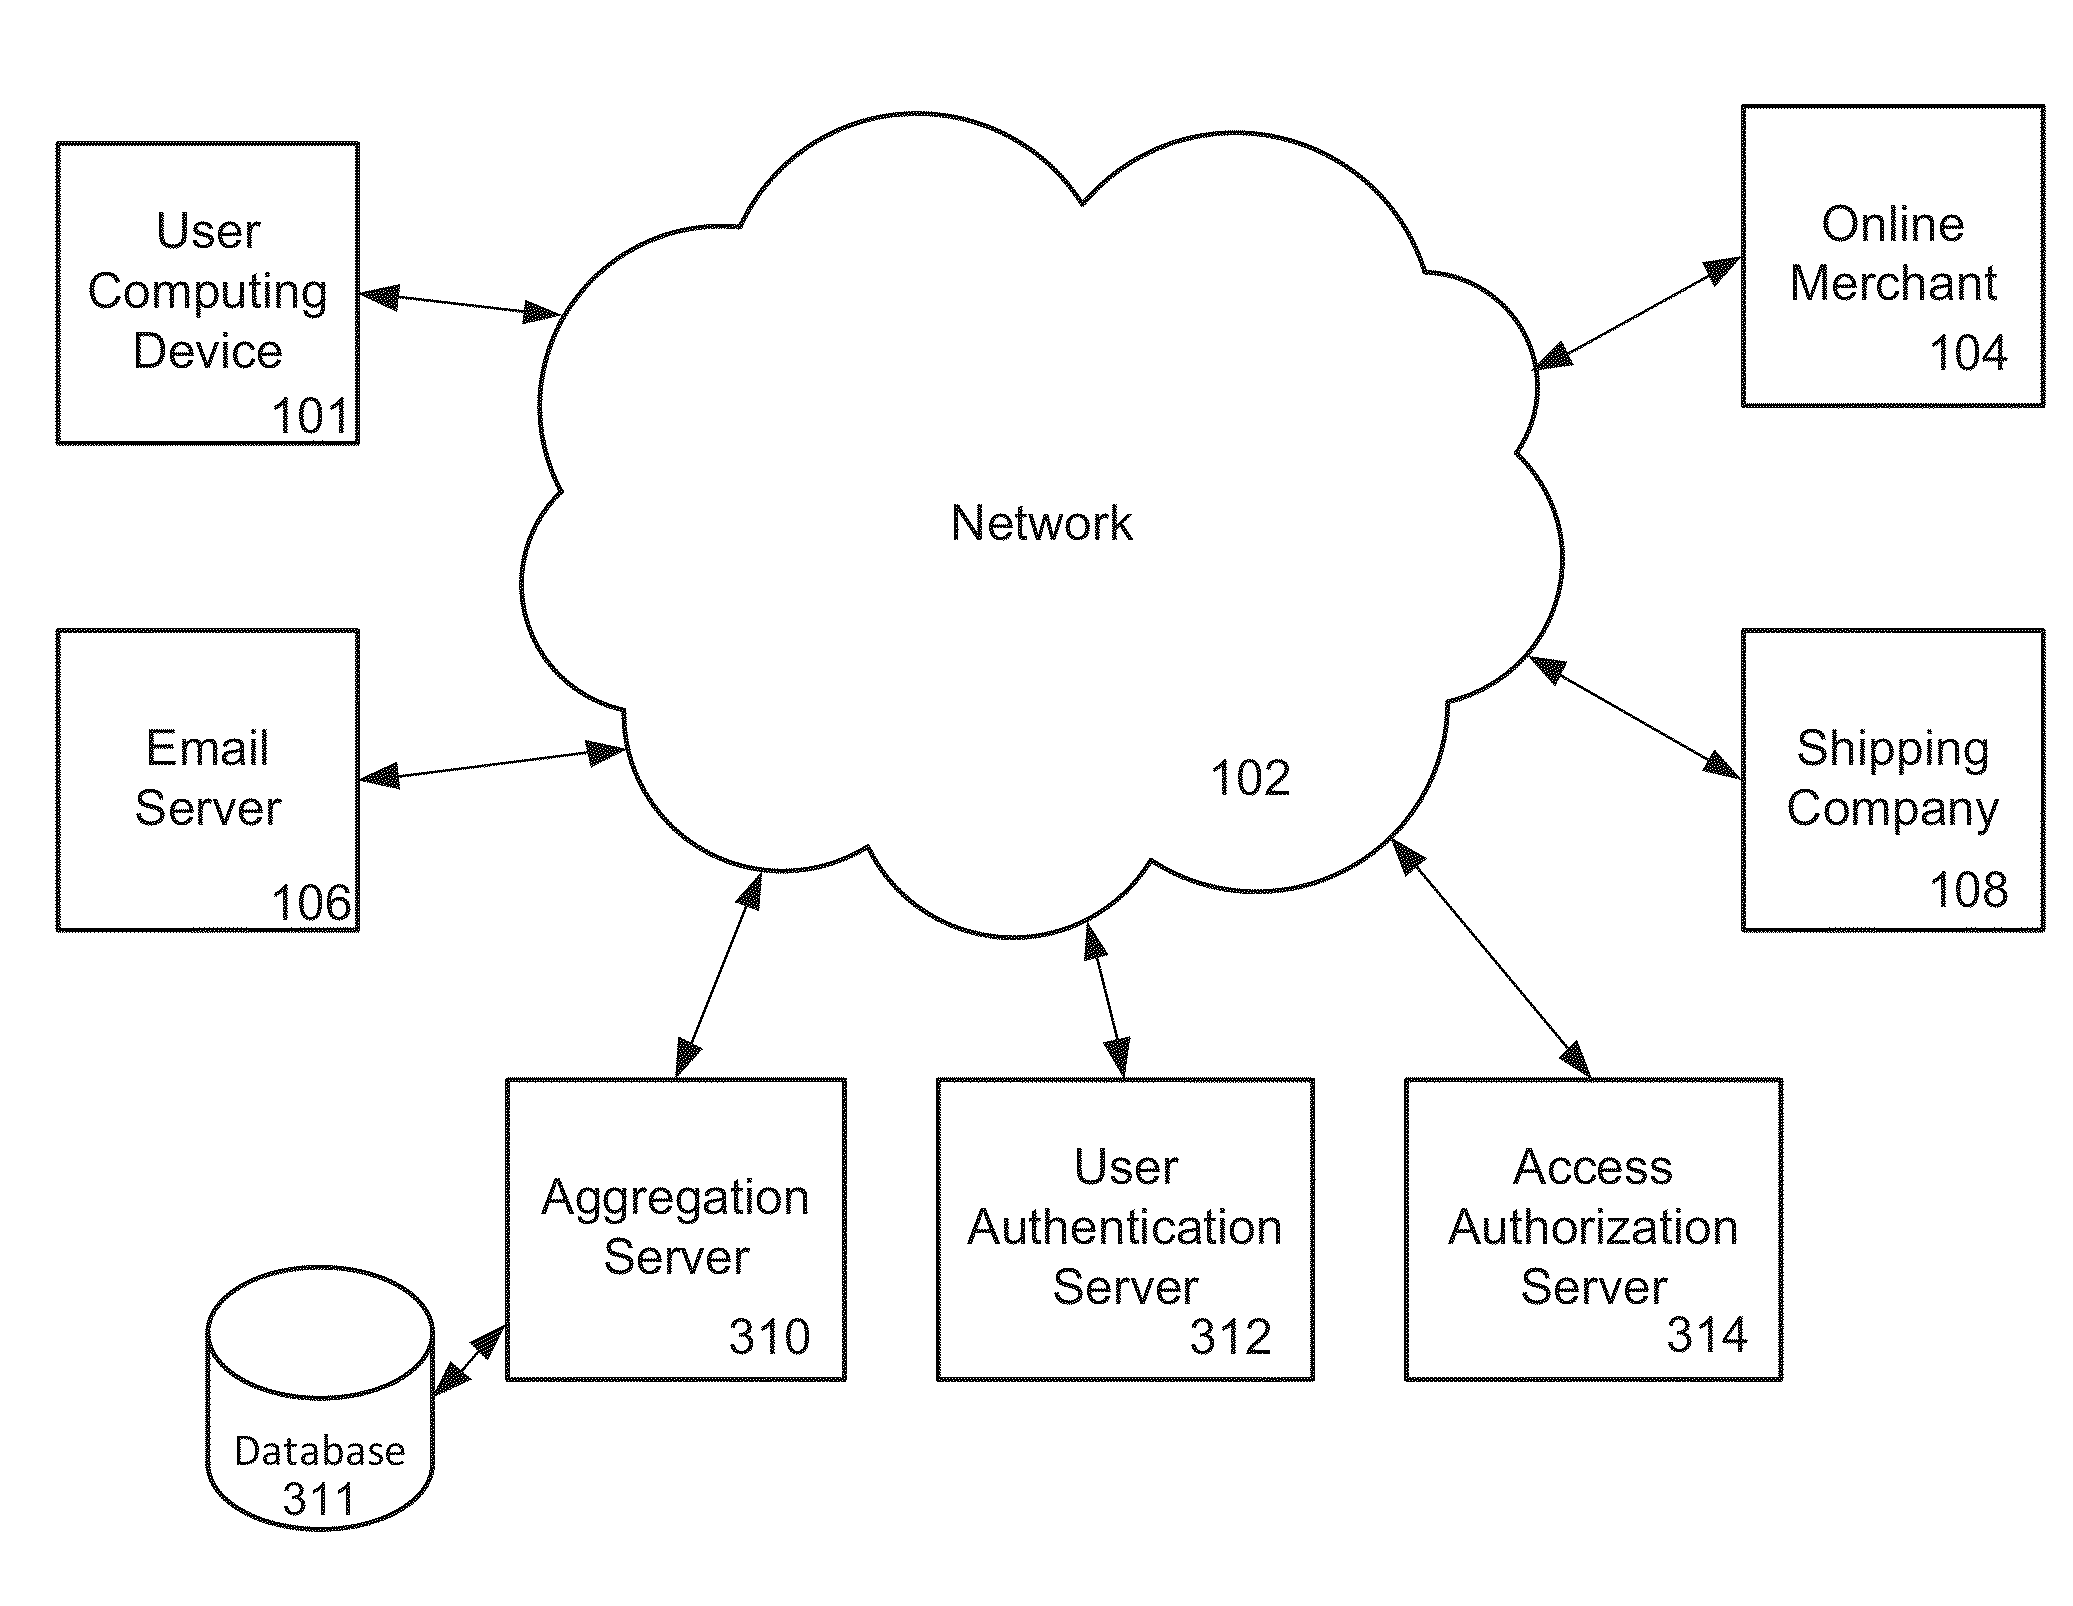 Augmented Aggregation of Emailed Product Order and Shipping Information